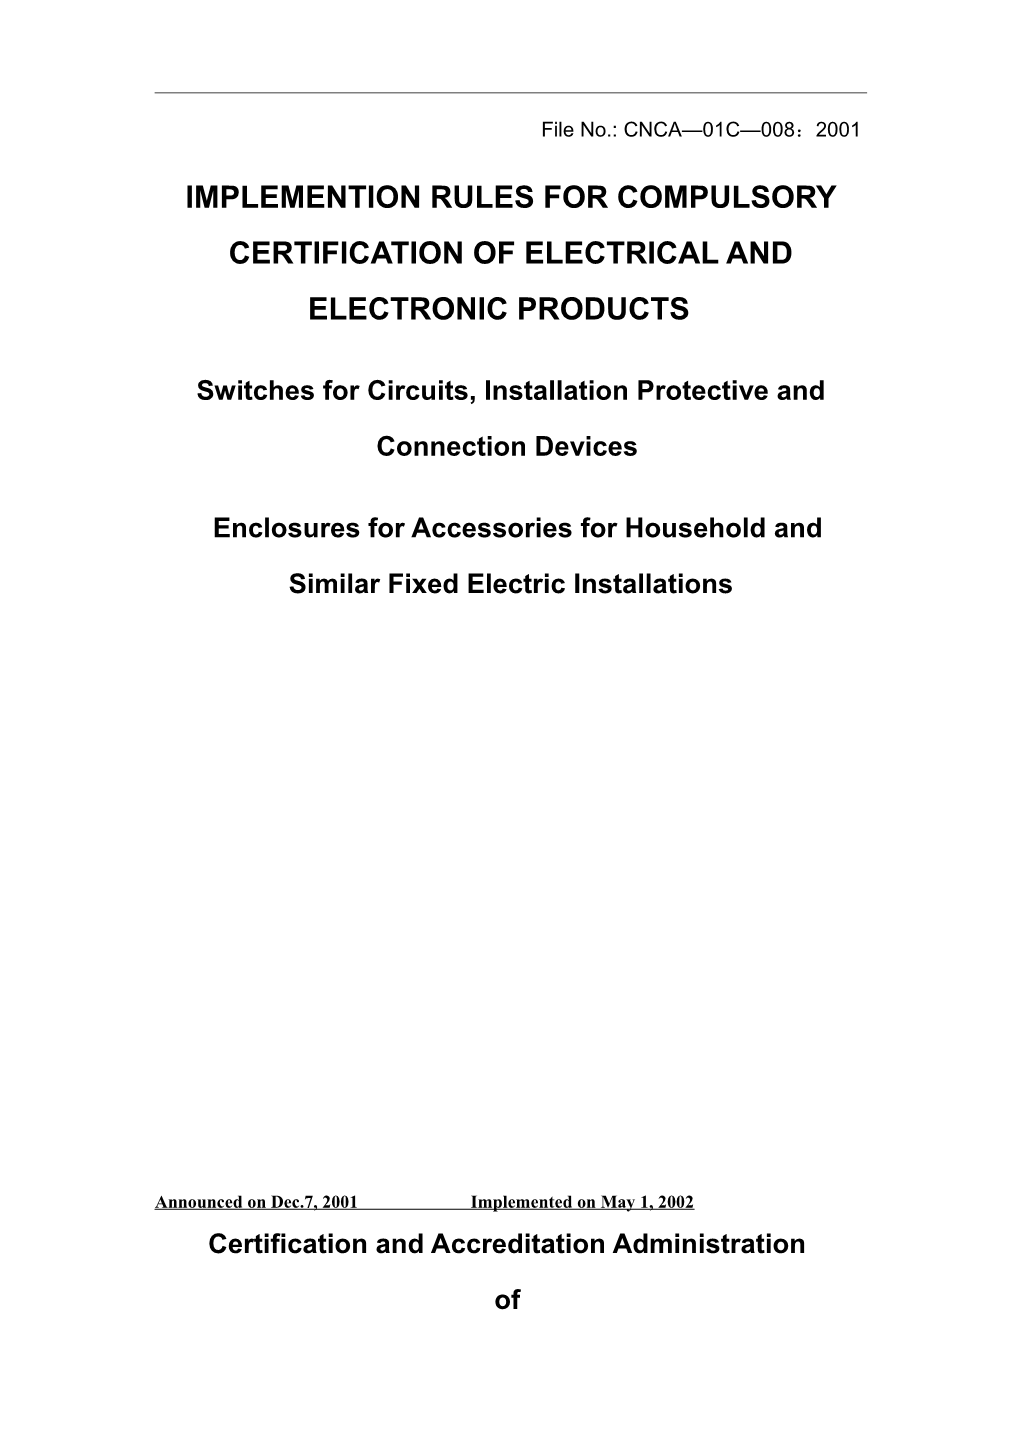 Regulations for Compulsory Certification of Household Electric Appliances s1